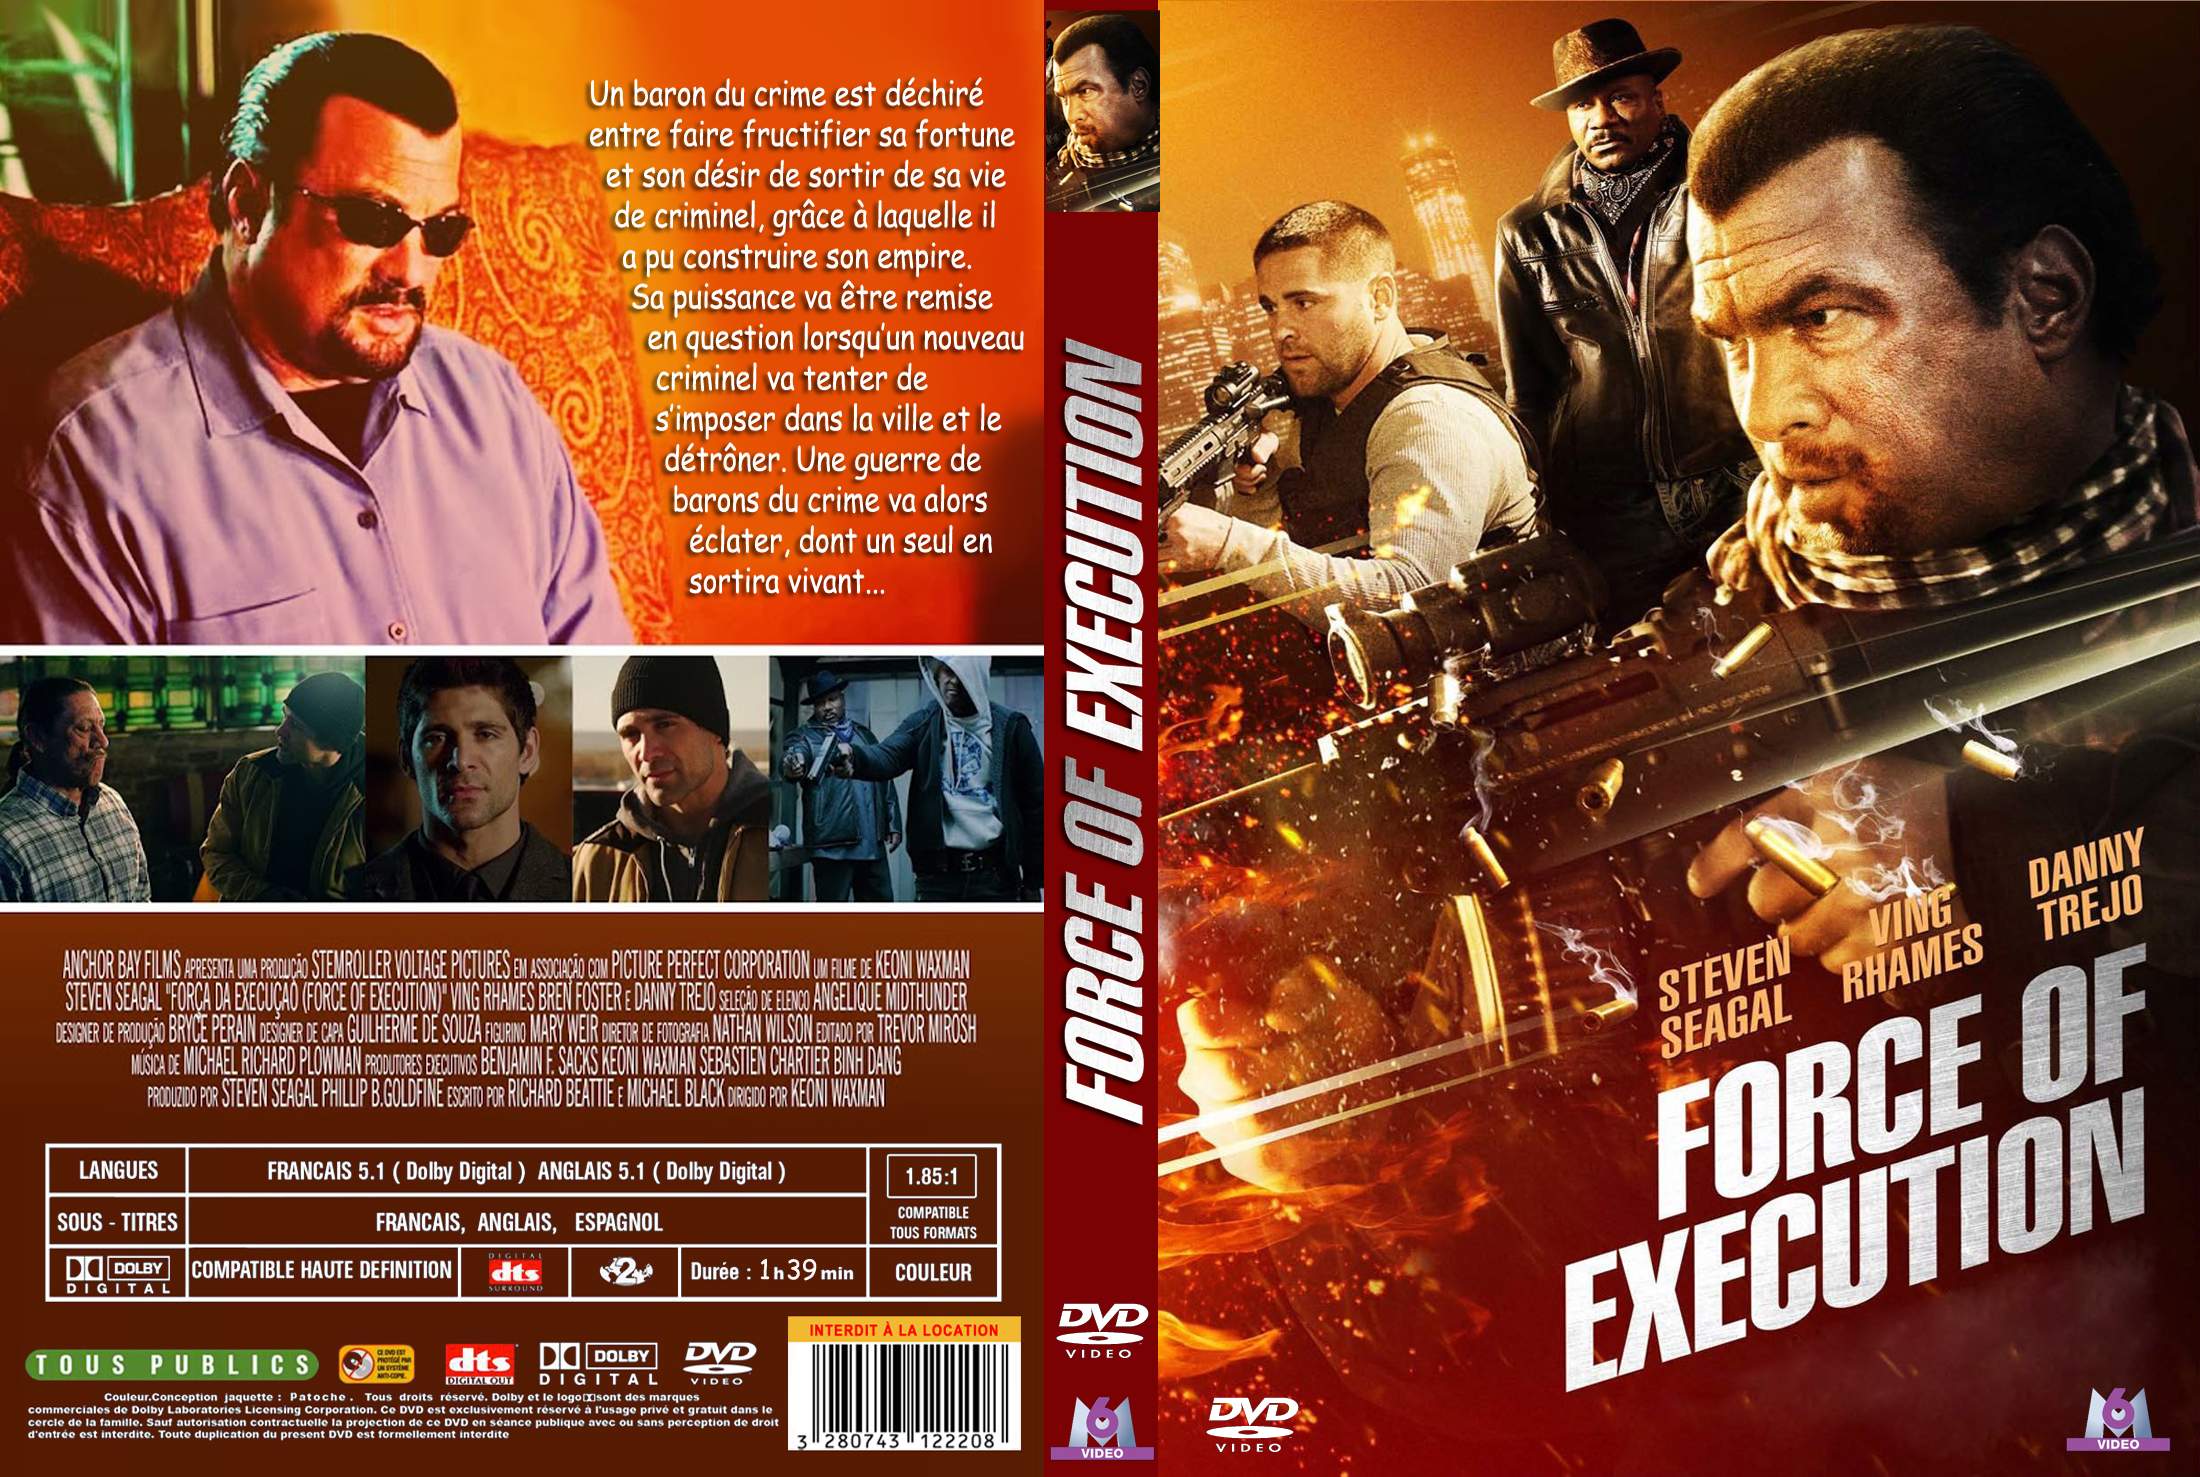 Jaquette DVD Force of Execution custom